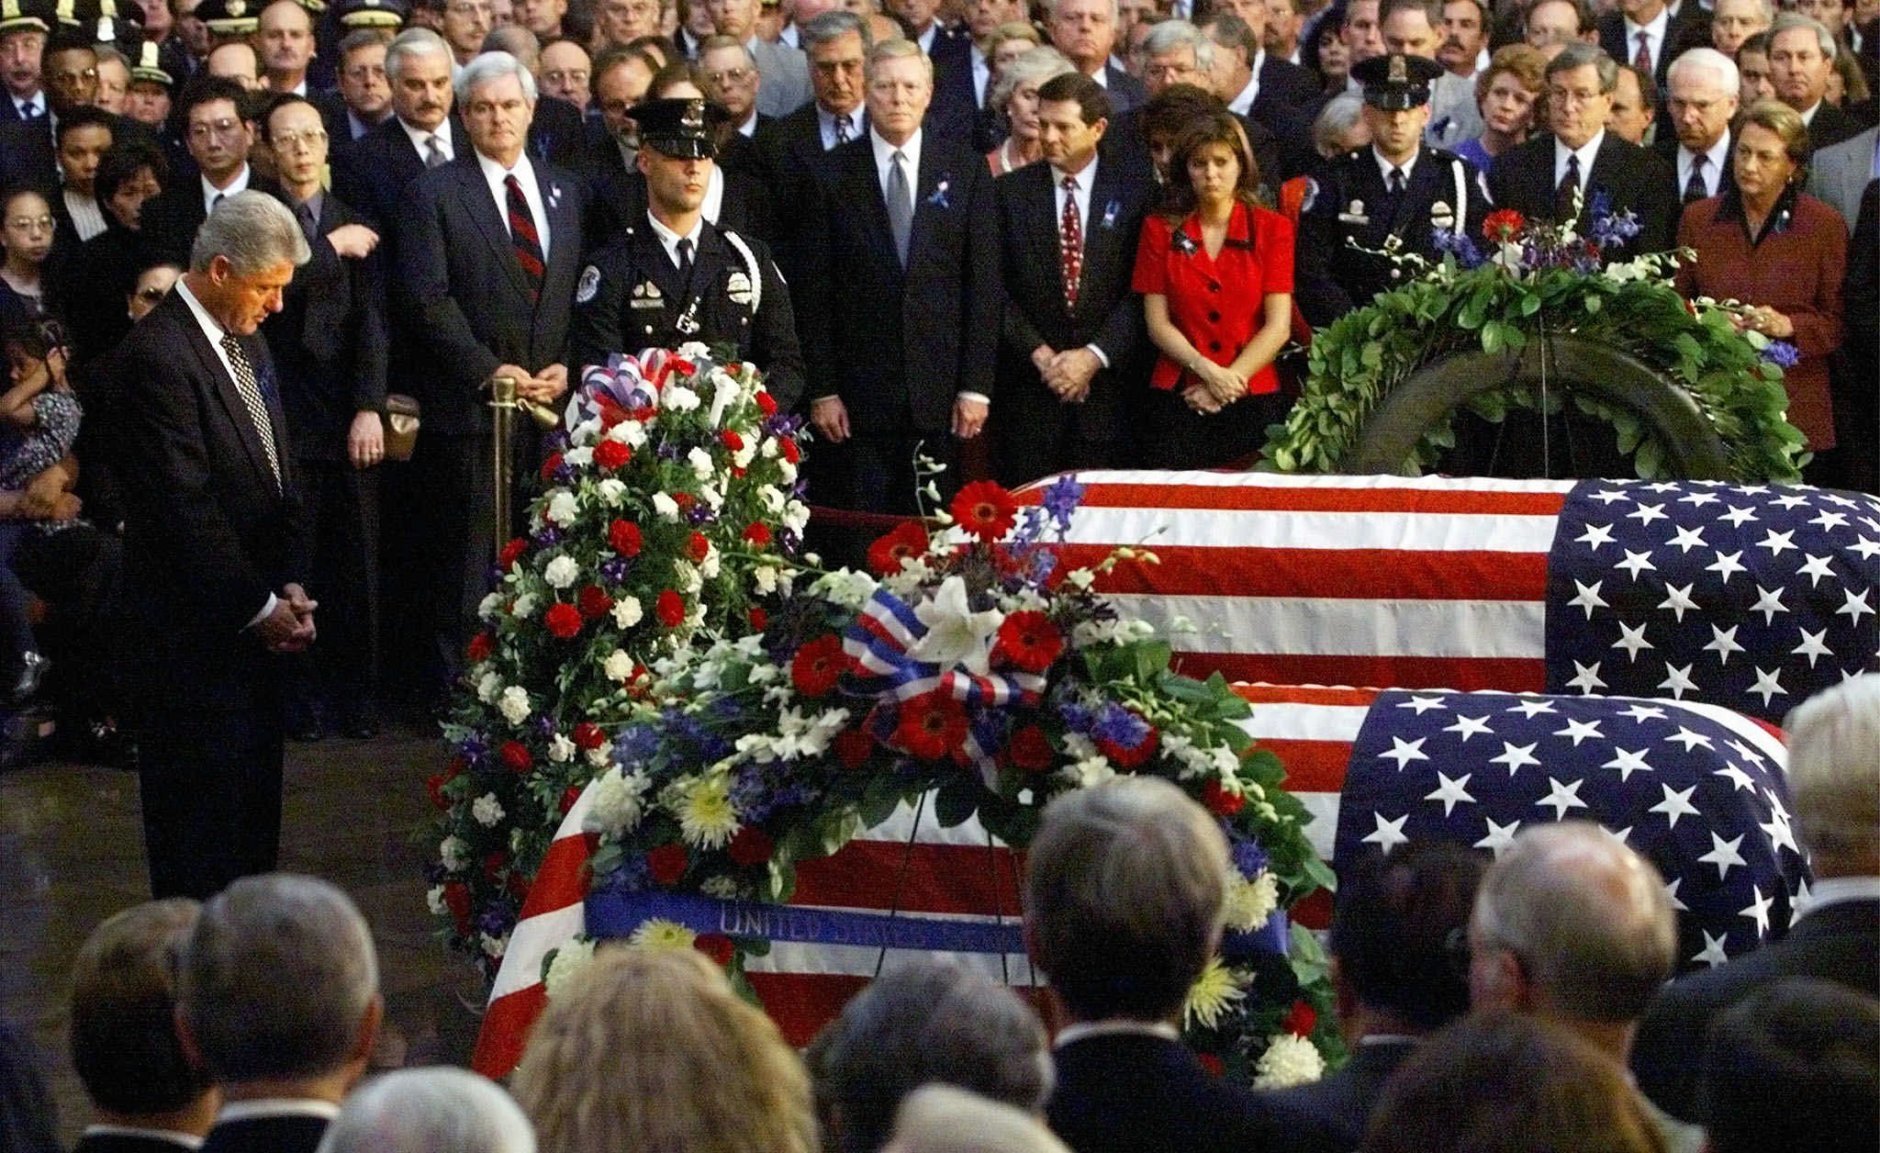 President Clinton pauses after laying a wreath at the caskets of Capitol officers Jacob J. Chestnut and John Gibson during a Congressional tribute at the Capitol Rotunda Tuesday, July 28, 1998, in Washington. (AP Photo/Win McNamee, Pool)